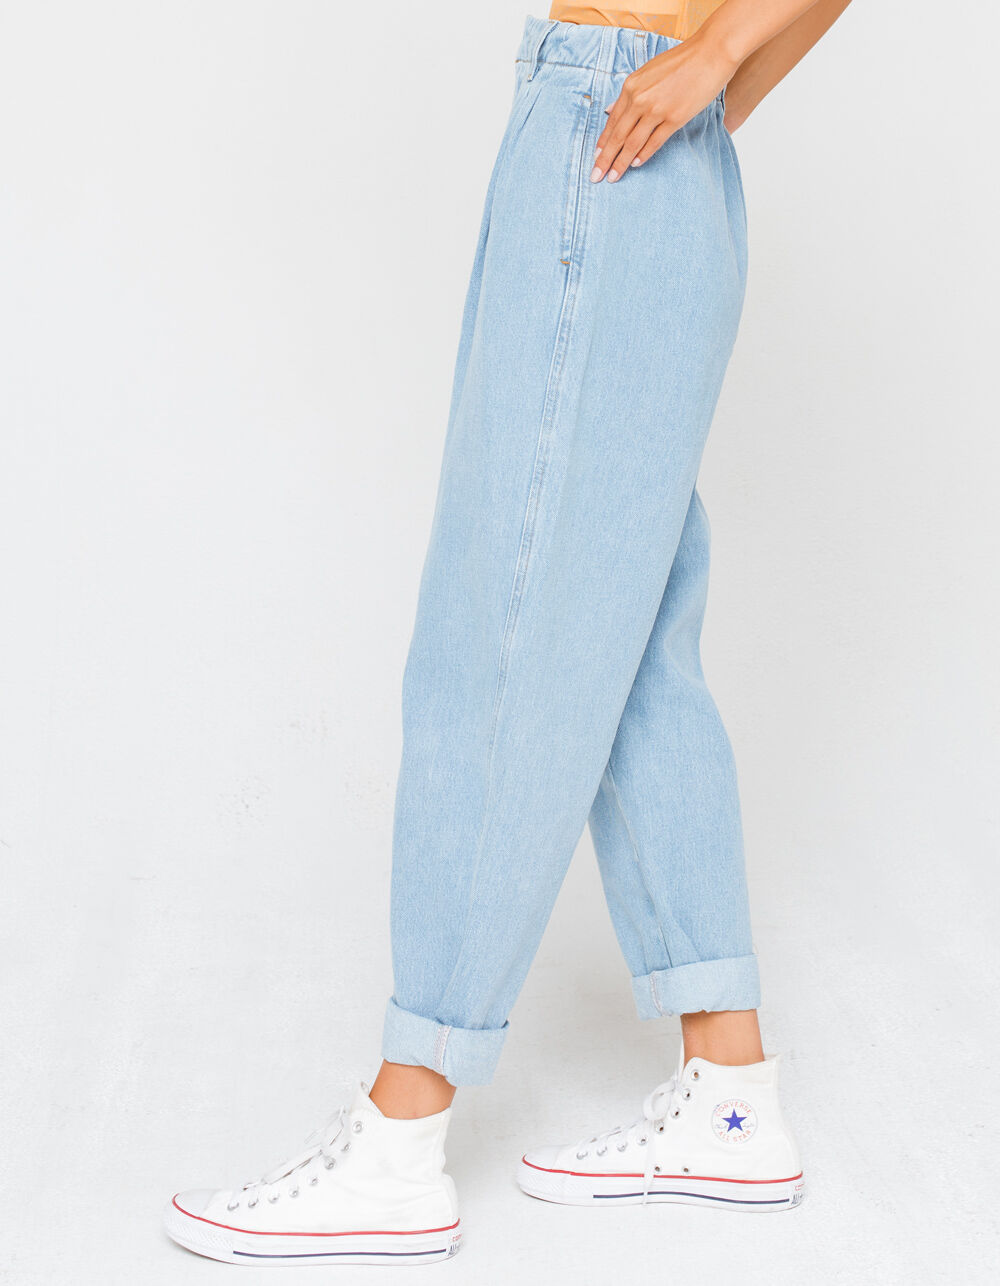 BDG Urban Outfitters Drew Womens Jeans - LIGHT WASH | Tillys